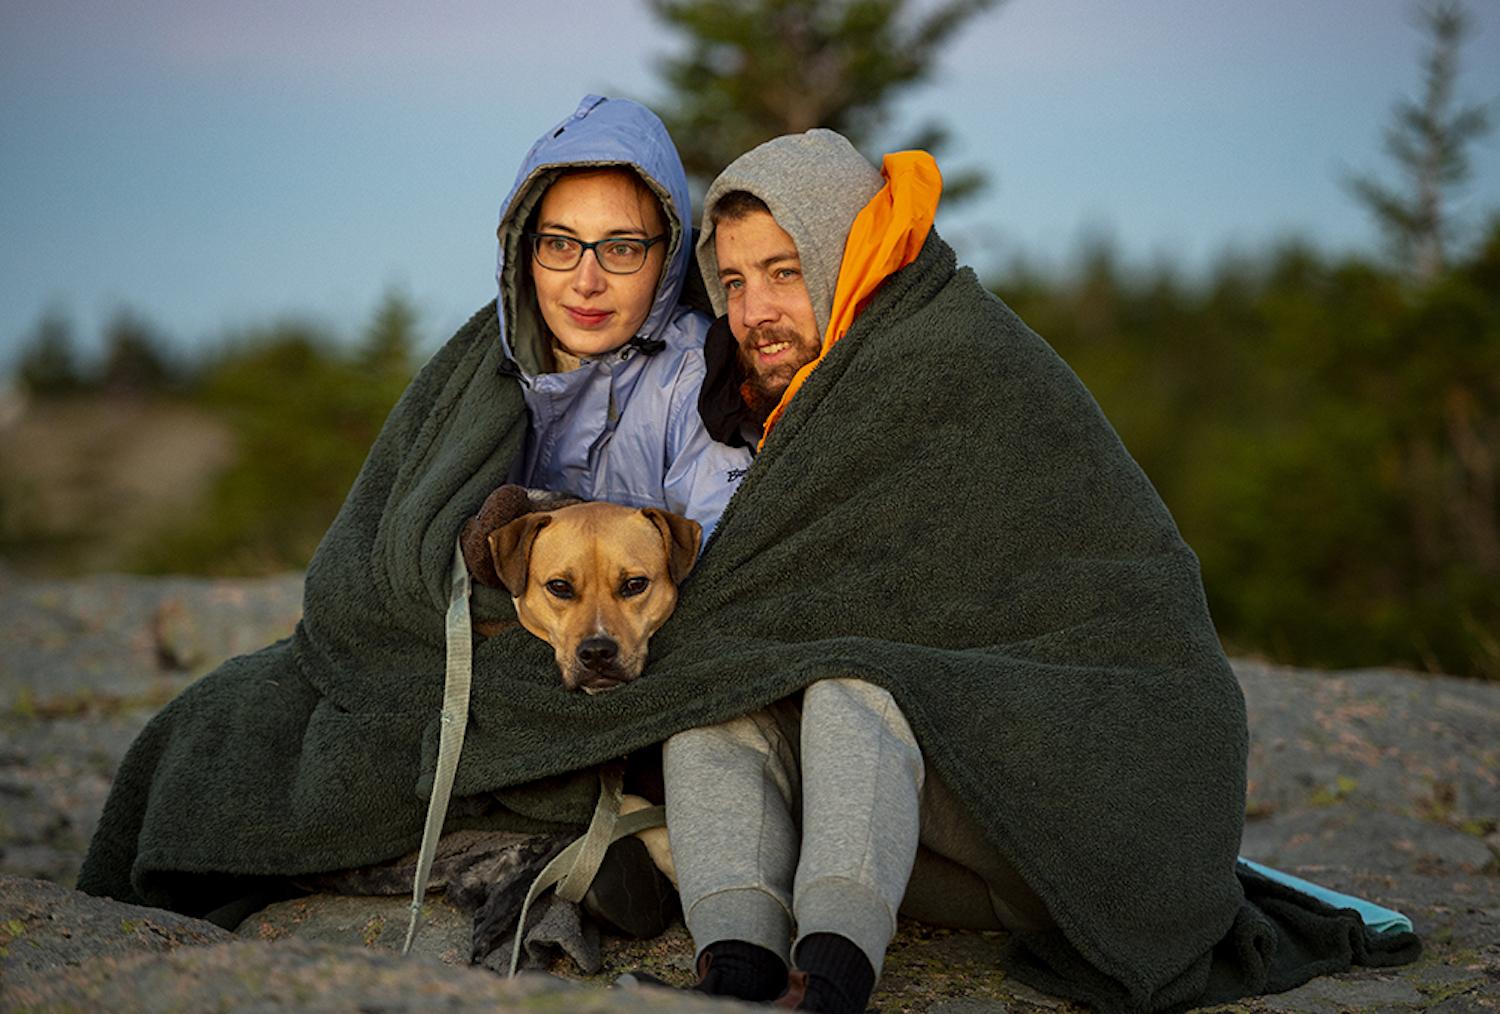 Park visitors Taylor Thompson and Russell Bloom wrap themselves and their dog Chloe in a blanket to stay warm while waiting for the sunrise on top of Cadillac mountain in Acadia National Park. (Photo by Will Newton/Friends of Acadia)